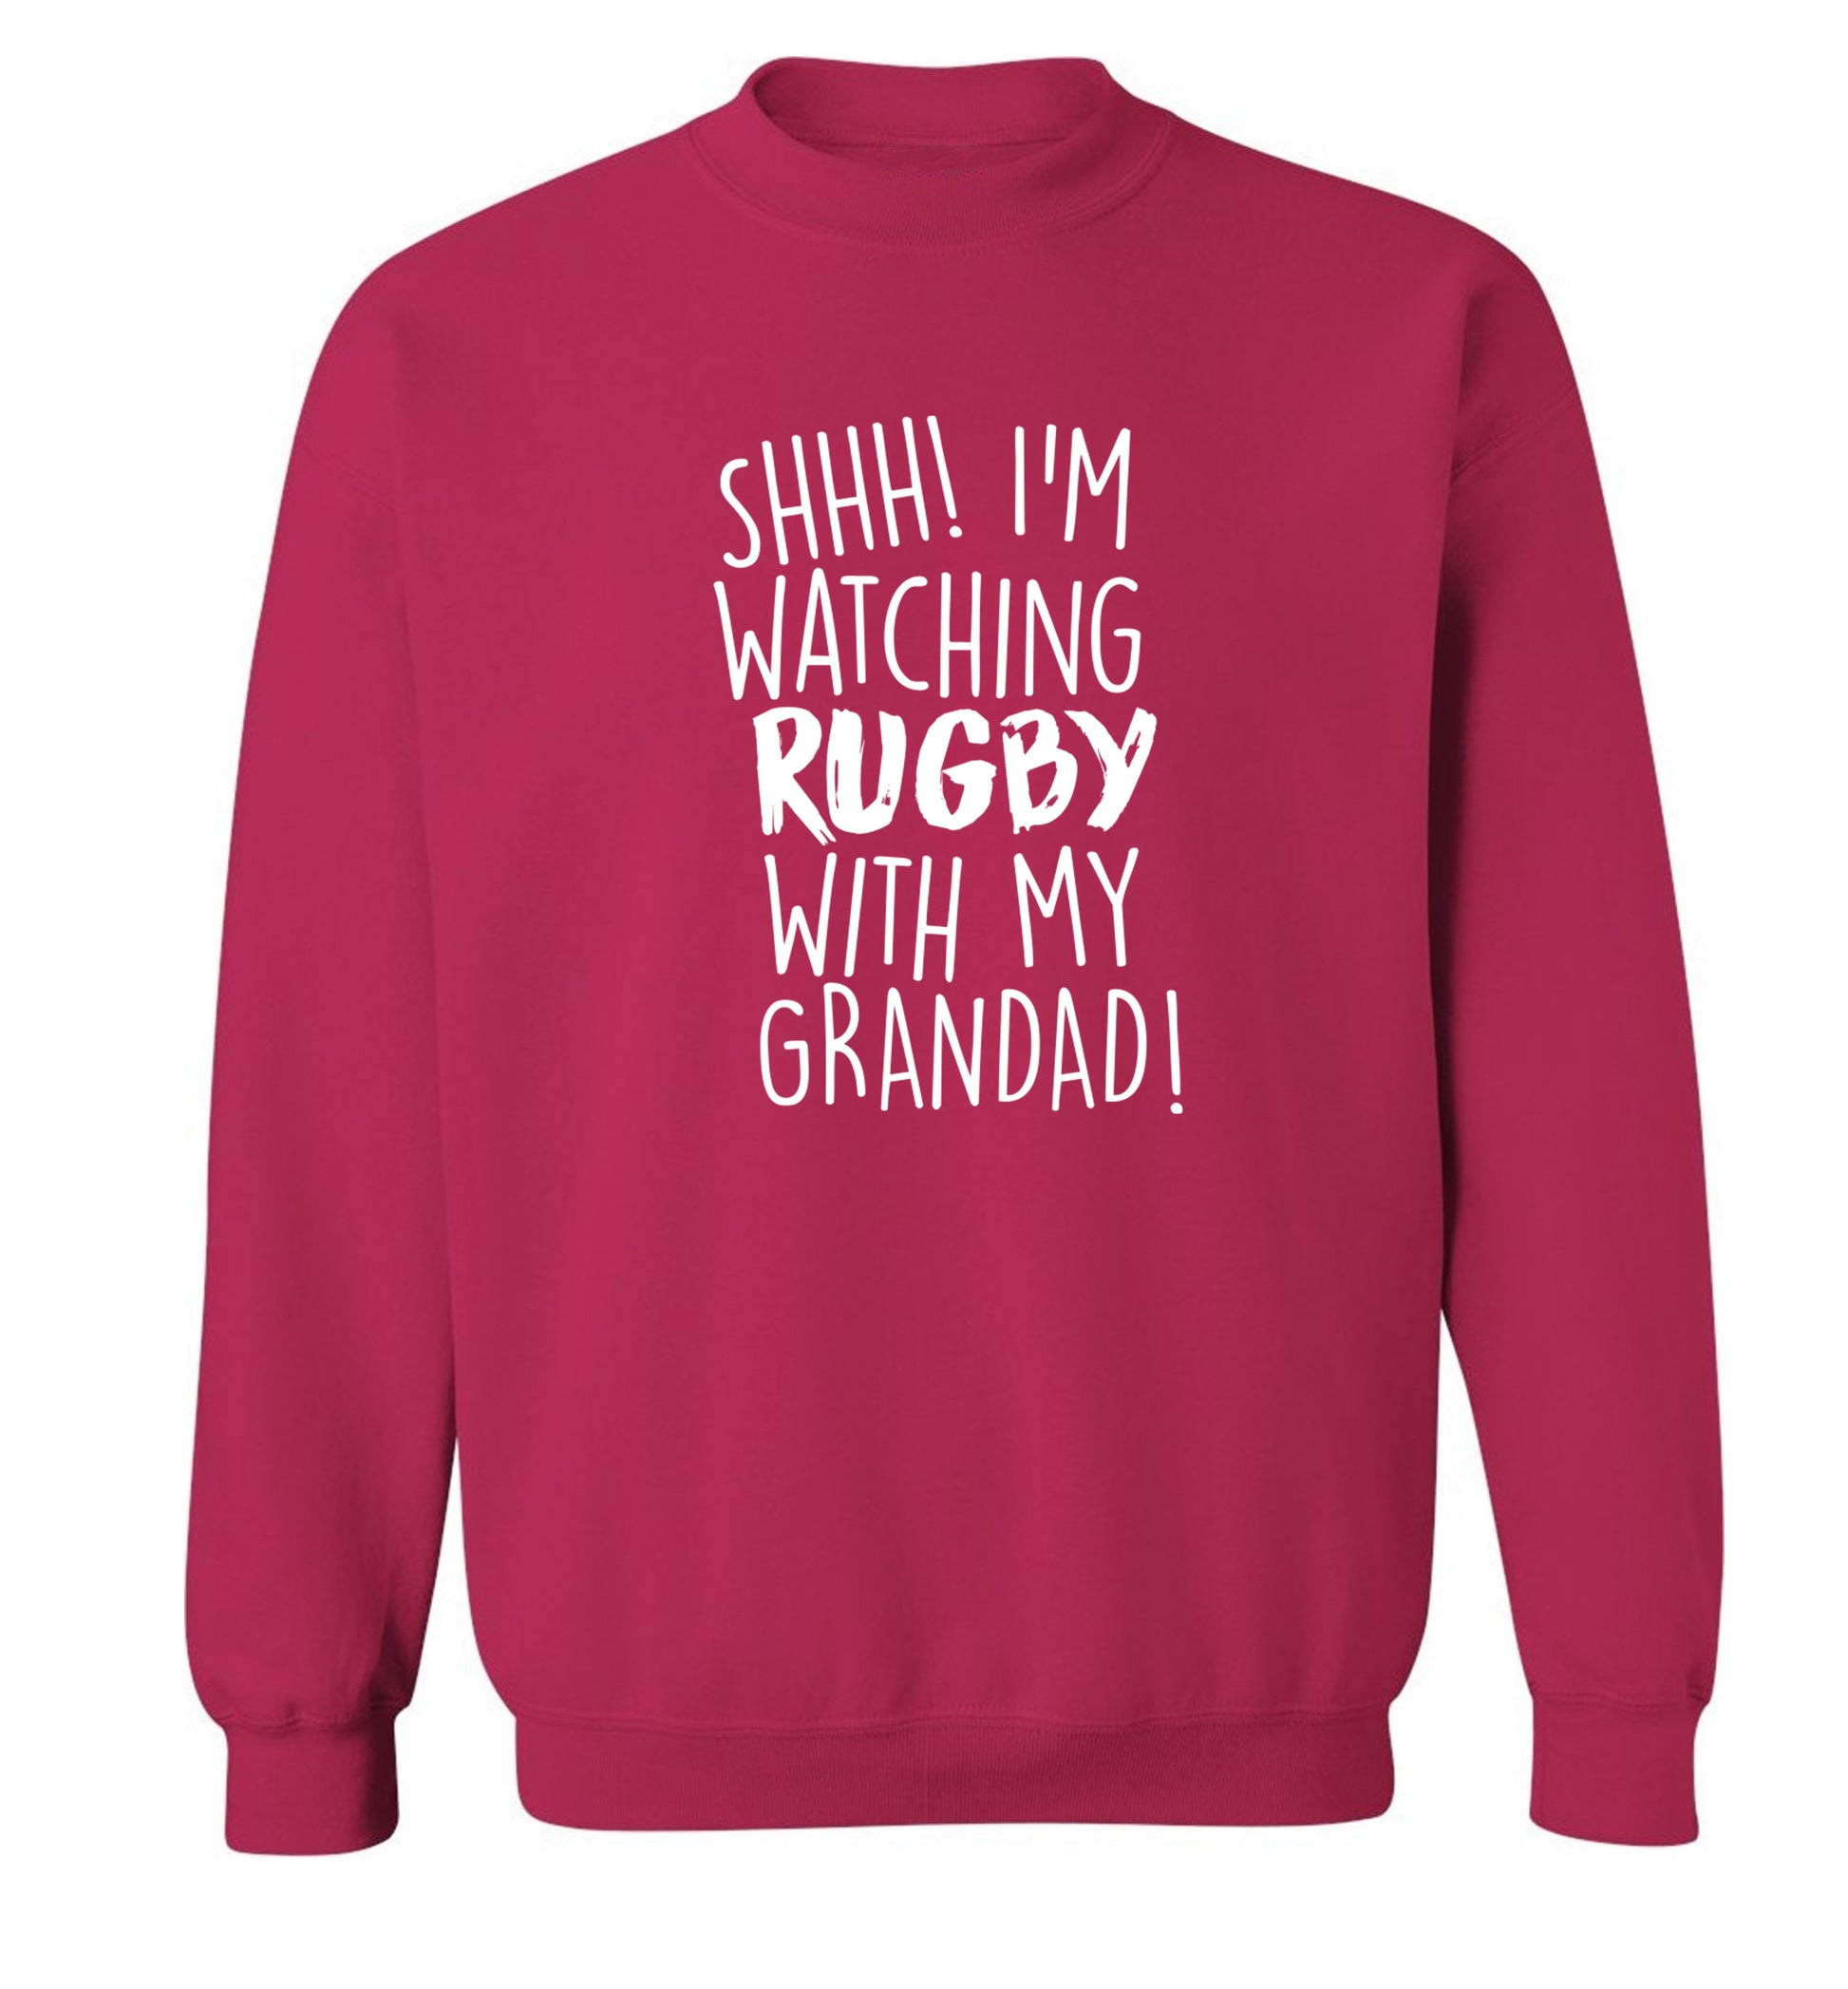 Shh I'm watching rugby with my grandad Adult's unisex pink Sweater 2XL